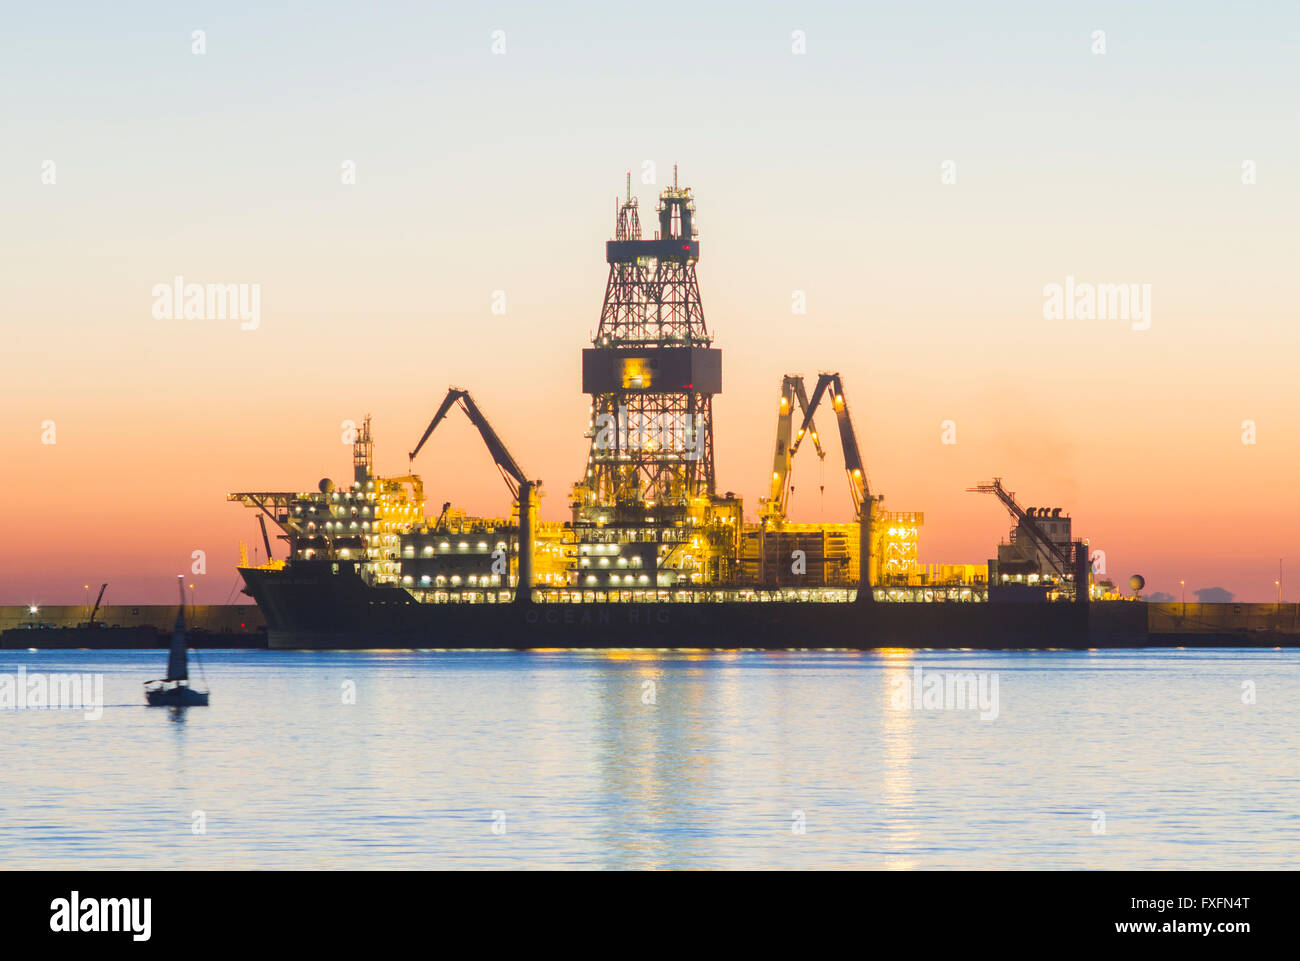 Las Palmas, Gran Canaria, Canary Islands, Spain, 15th April 2016. Weather: A yacht sails past an oil rig at sunrise in Las Palmas port on a glorious Thursday morning in Las Palmas, the capital of Gran Canaria. PICTURED: Las Palmas port is used by a number of oil companies for repairs, resupplying, and in the the case of some of the rigs/platforms in these images, for mothballing rigs for long periods due to the fall in oil prices and over supply of crude oil. Credit:  Alan Dawson News/Alamy Live News Stock Photo